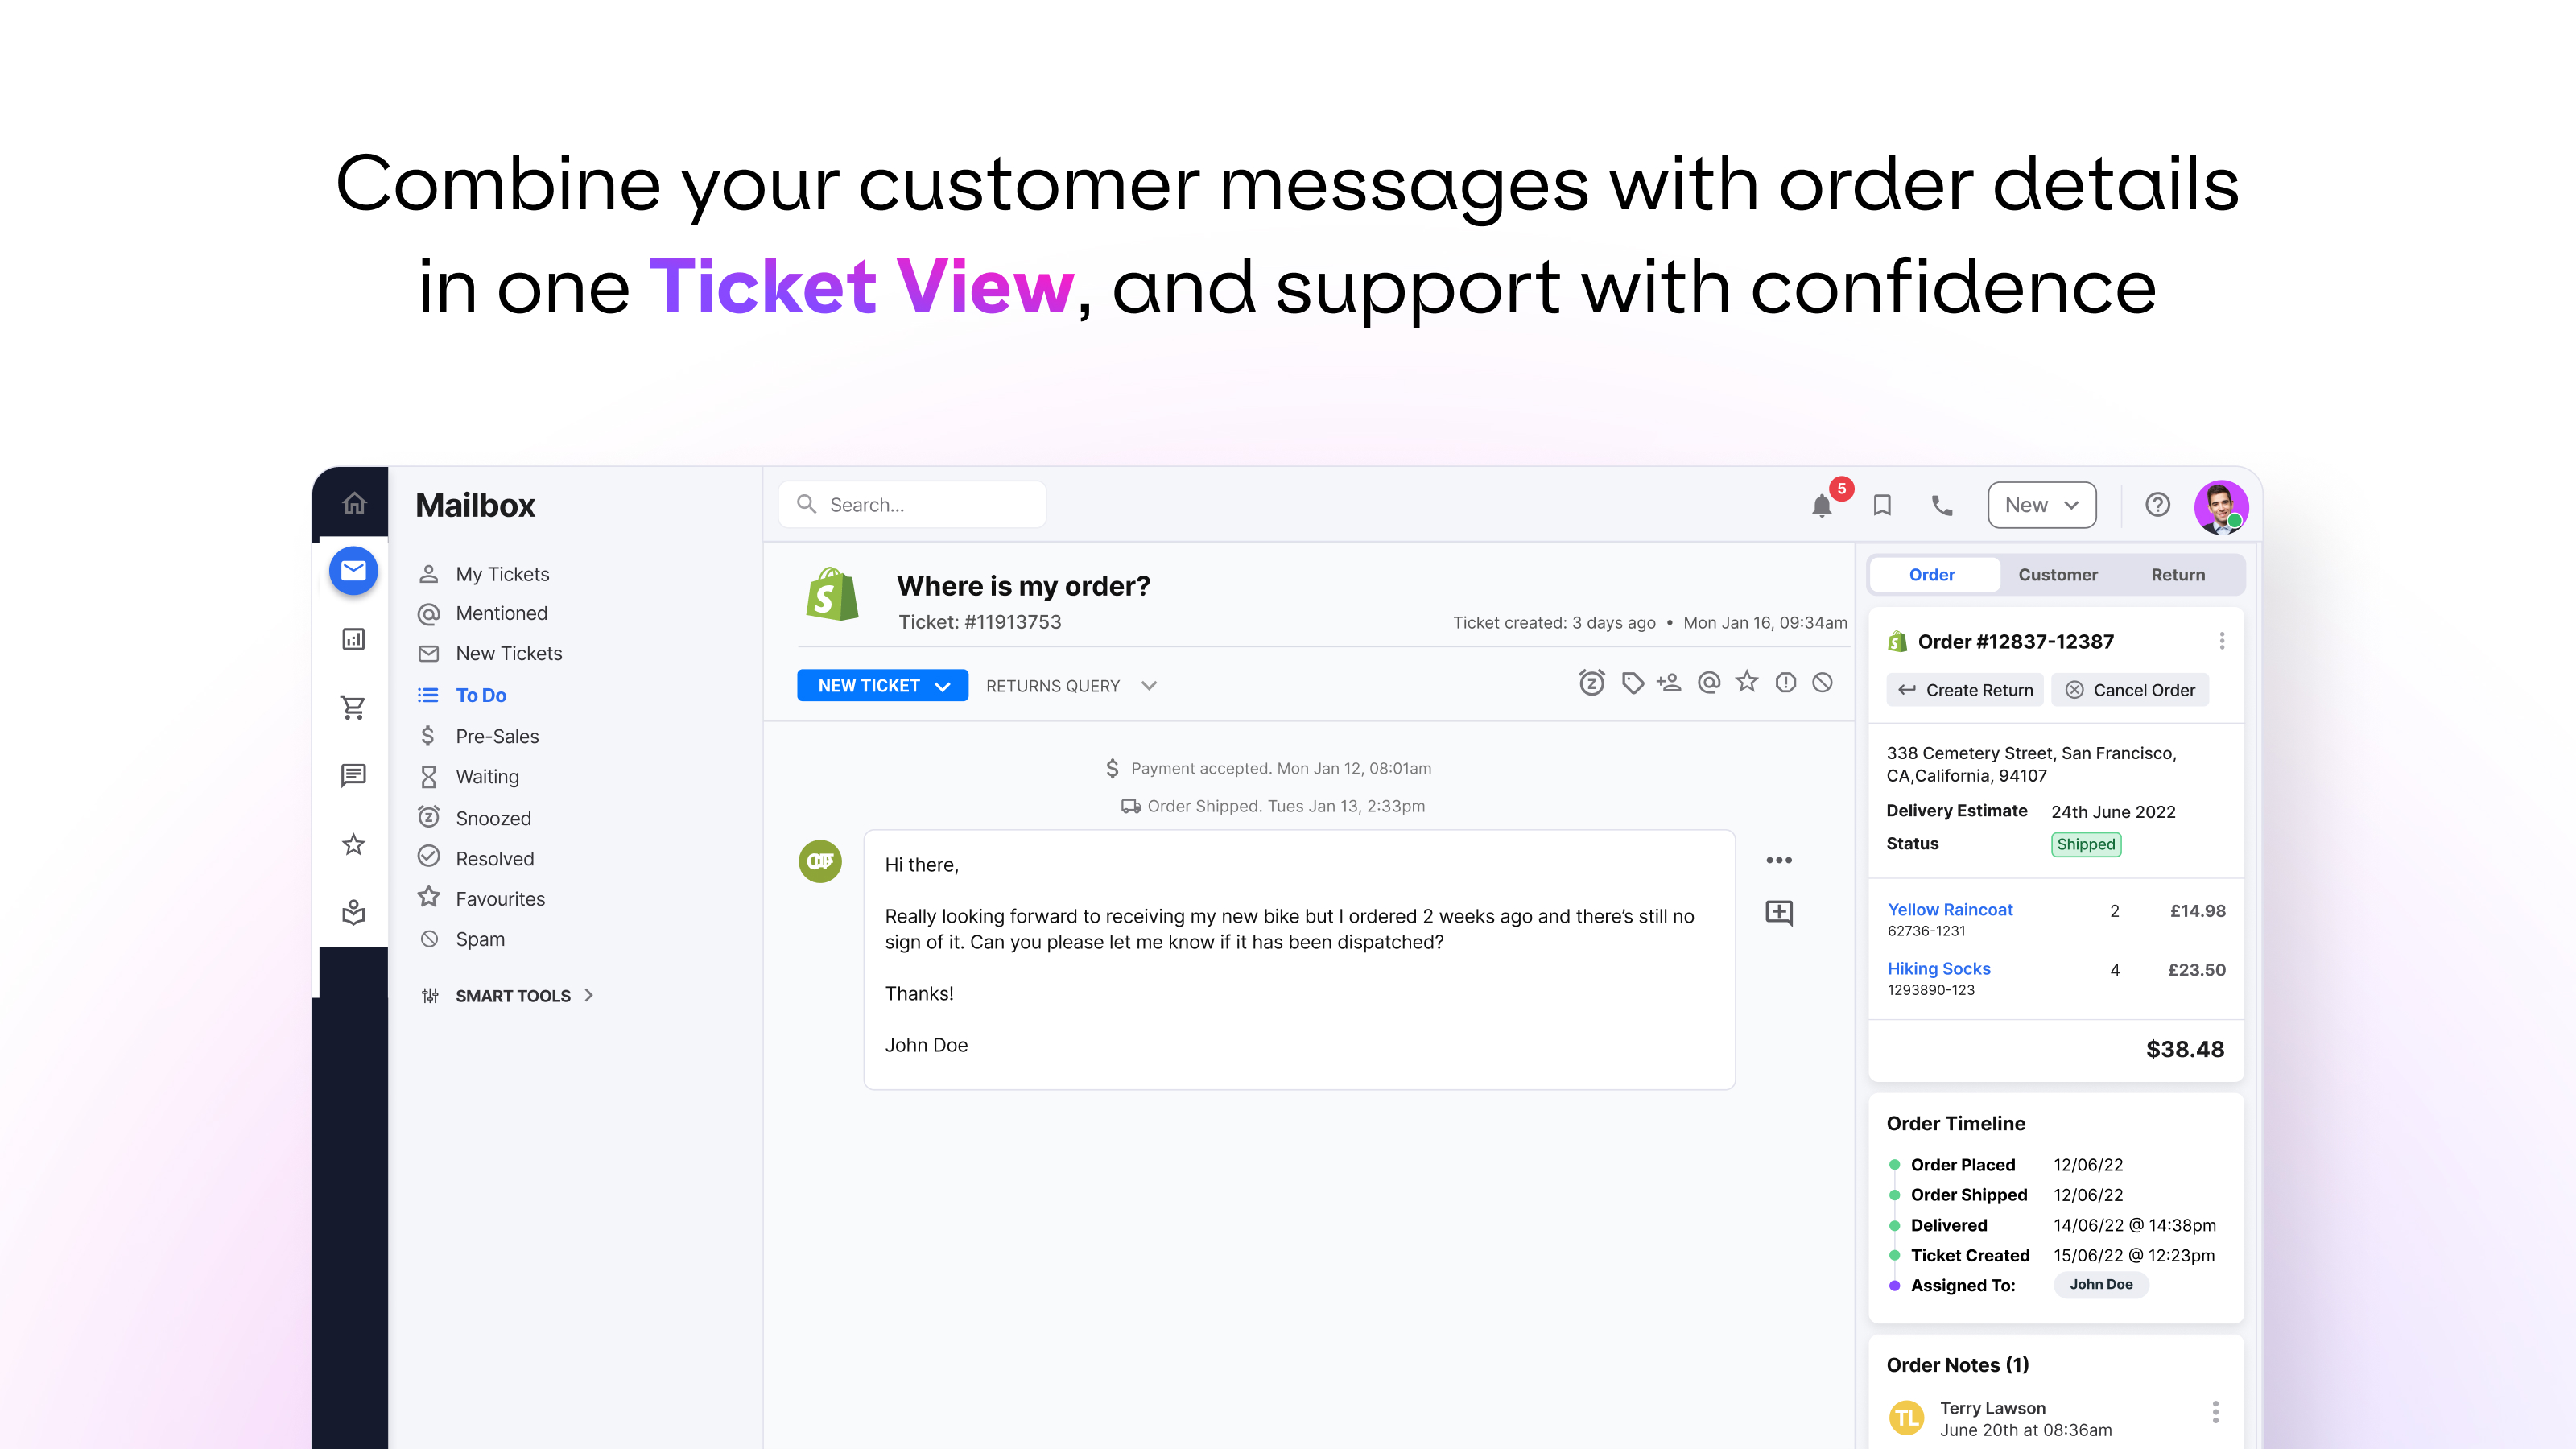 eDesk's powerful Ticket View allows you to consult all your order and customer information directly on your tickets, at one glance.